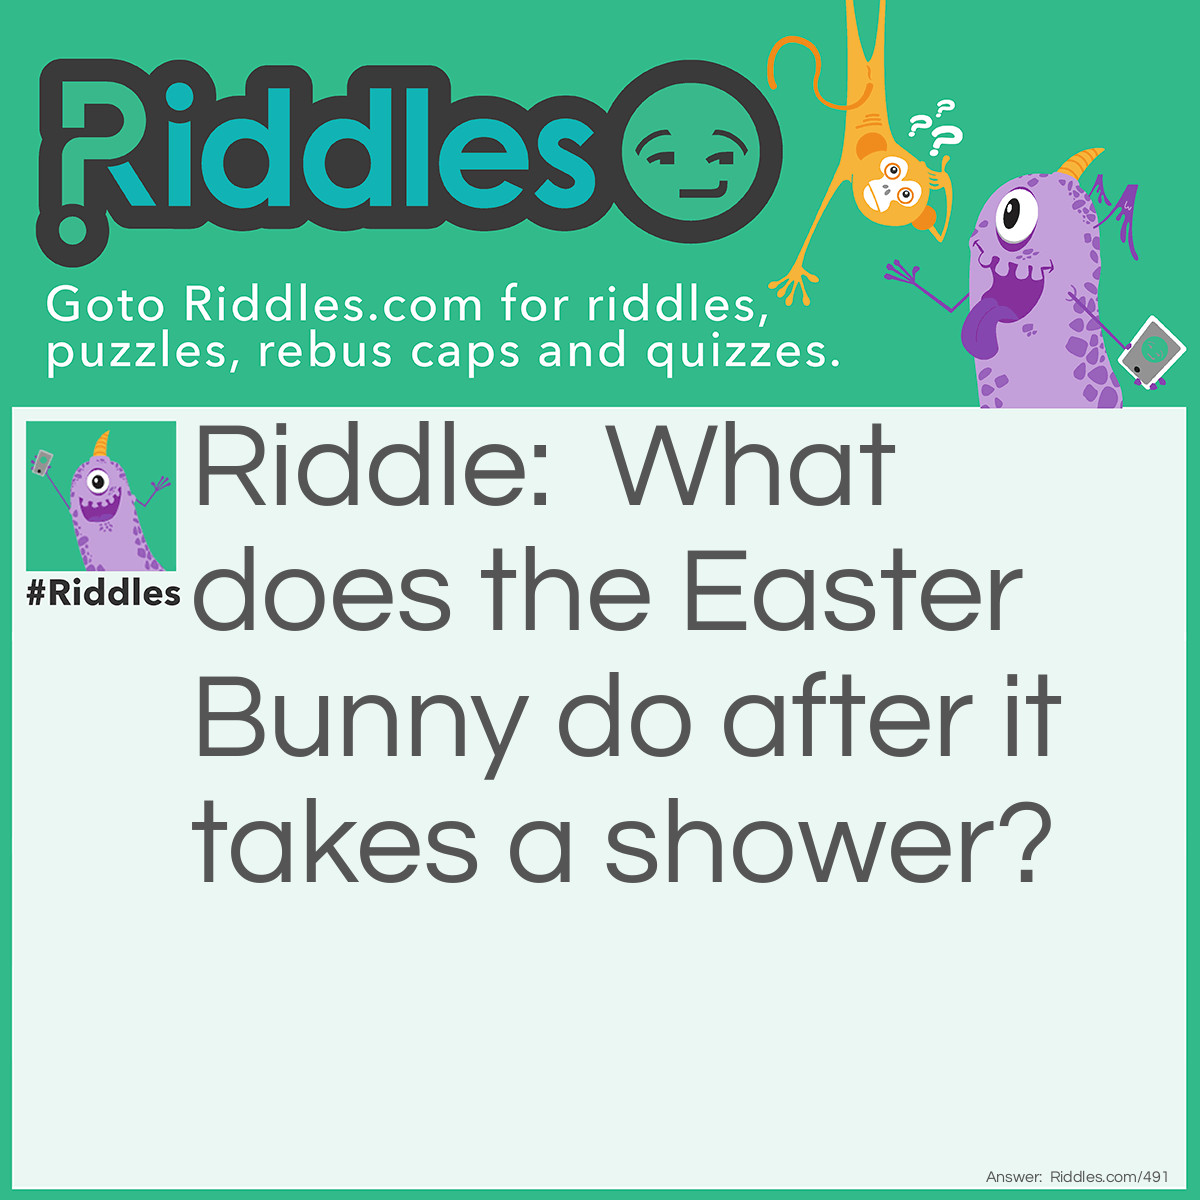 Riddle: What does the Easter Bunny do after it takes a shower? Answer: He uses a Hare dryer